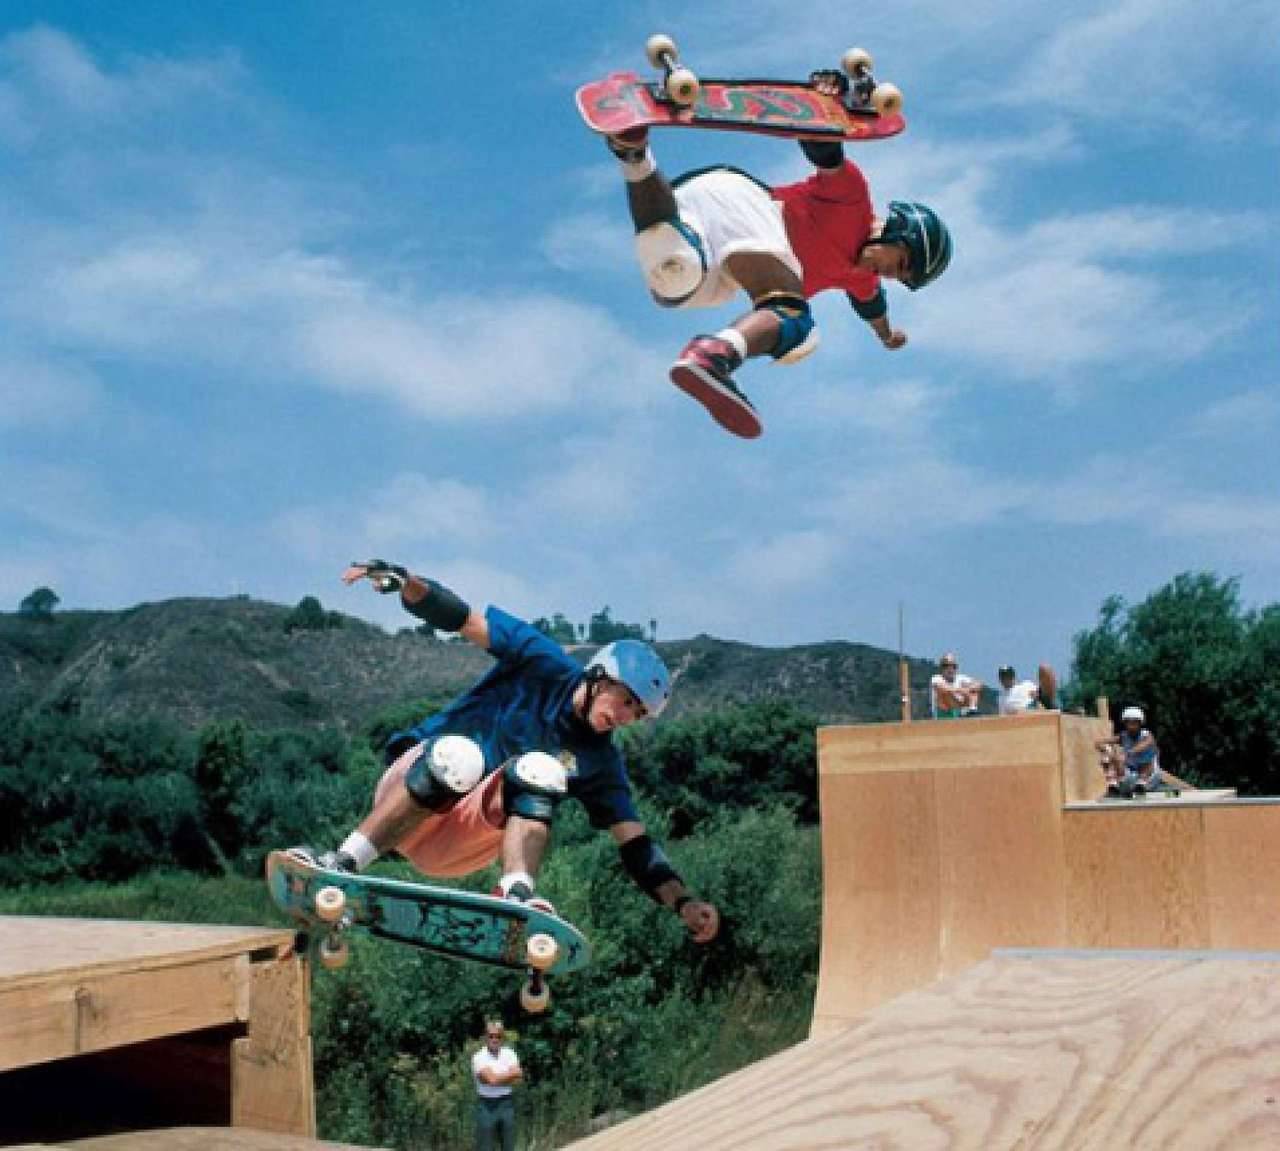 Steve Caballero describes the origins of the iconic Vans from 1989